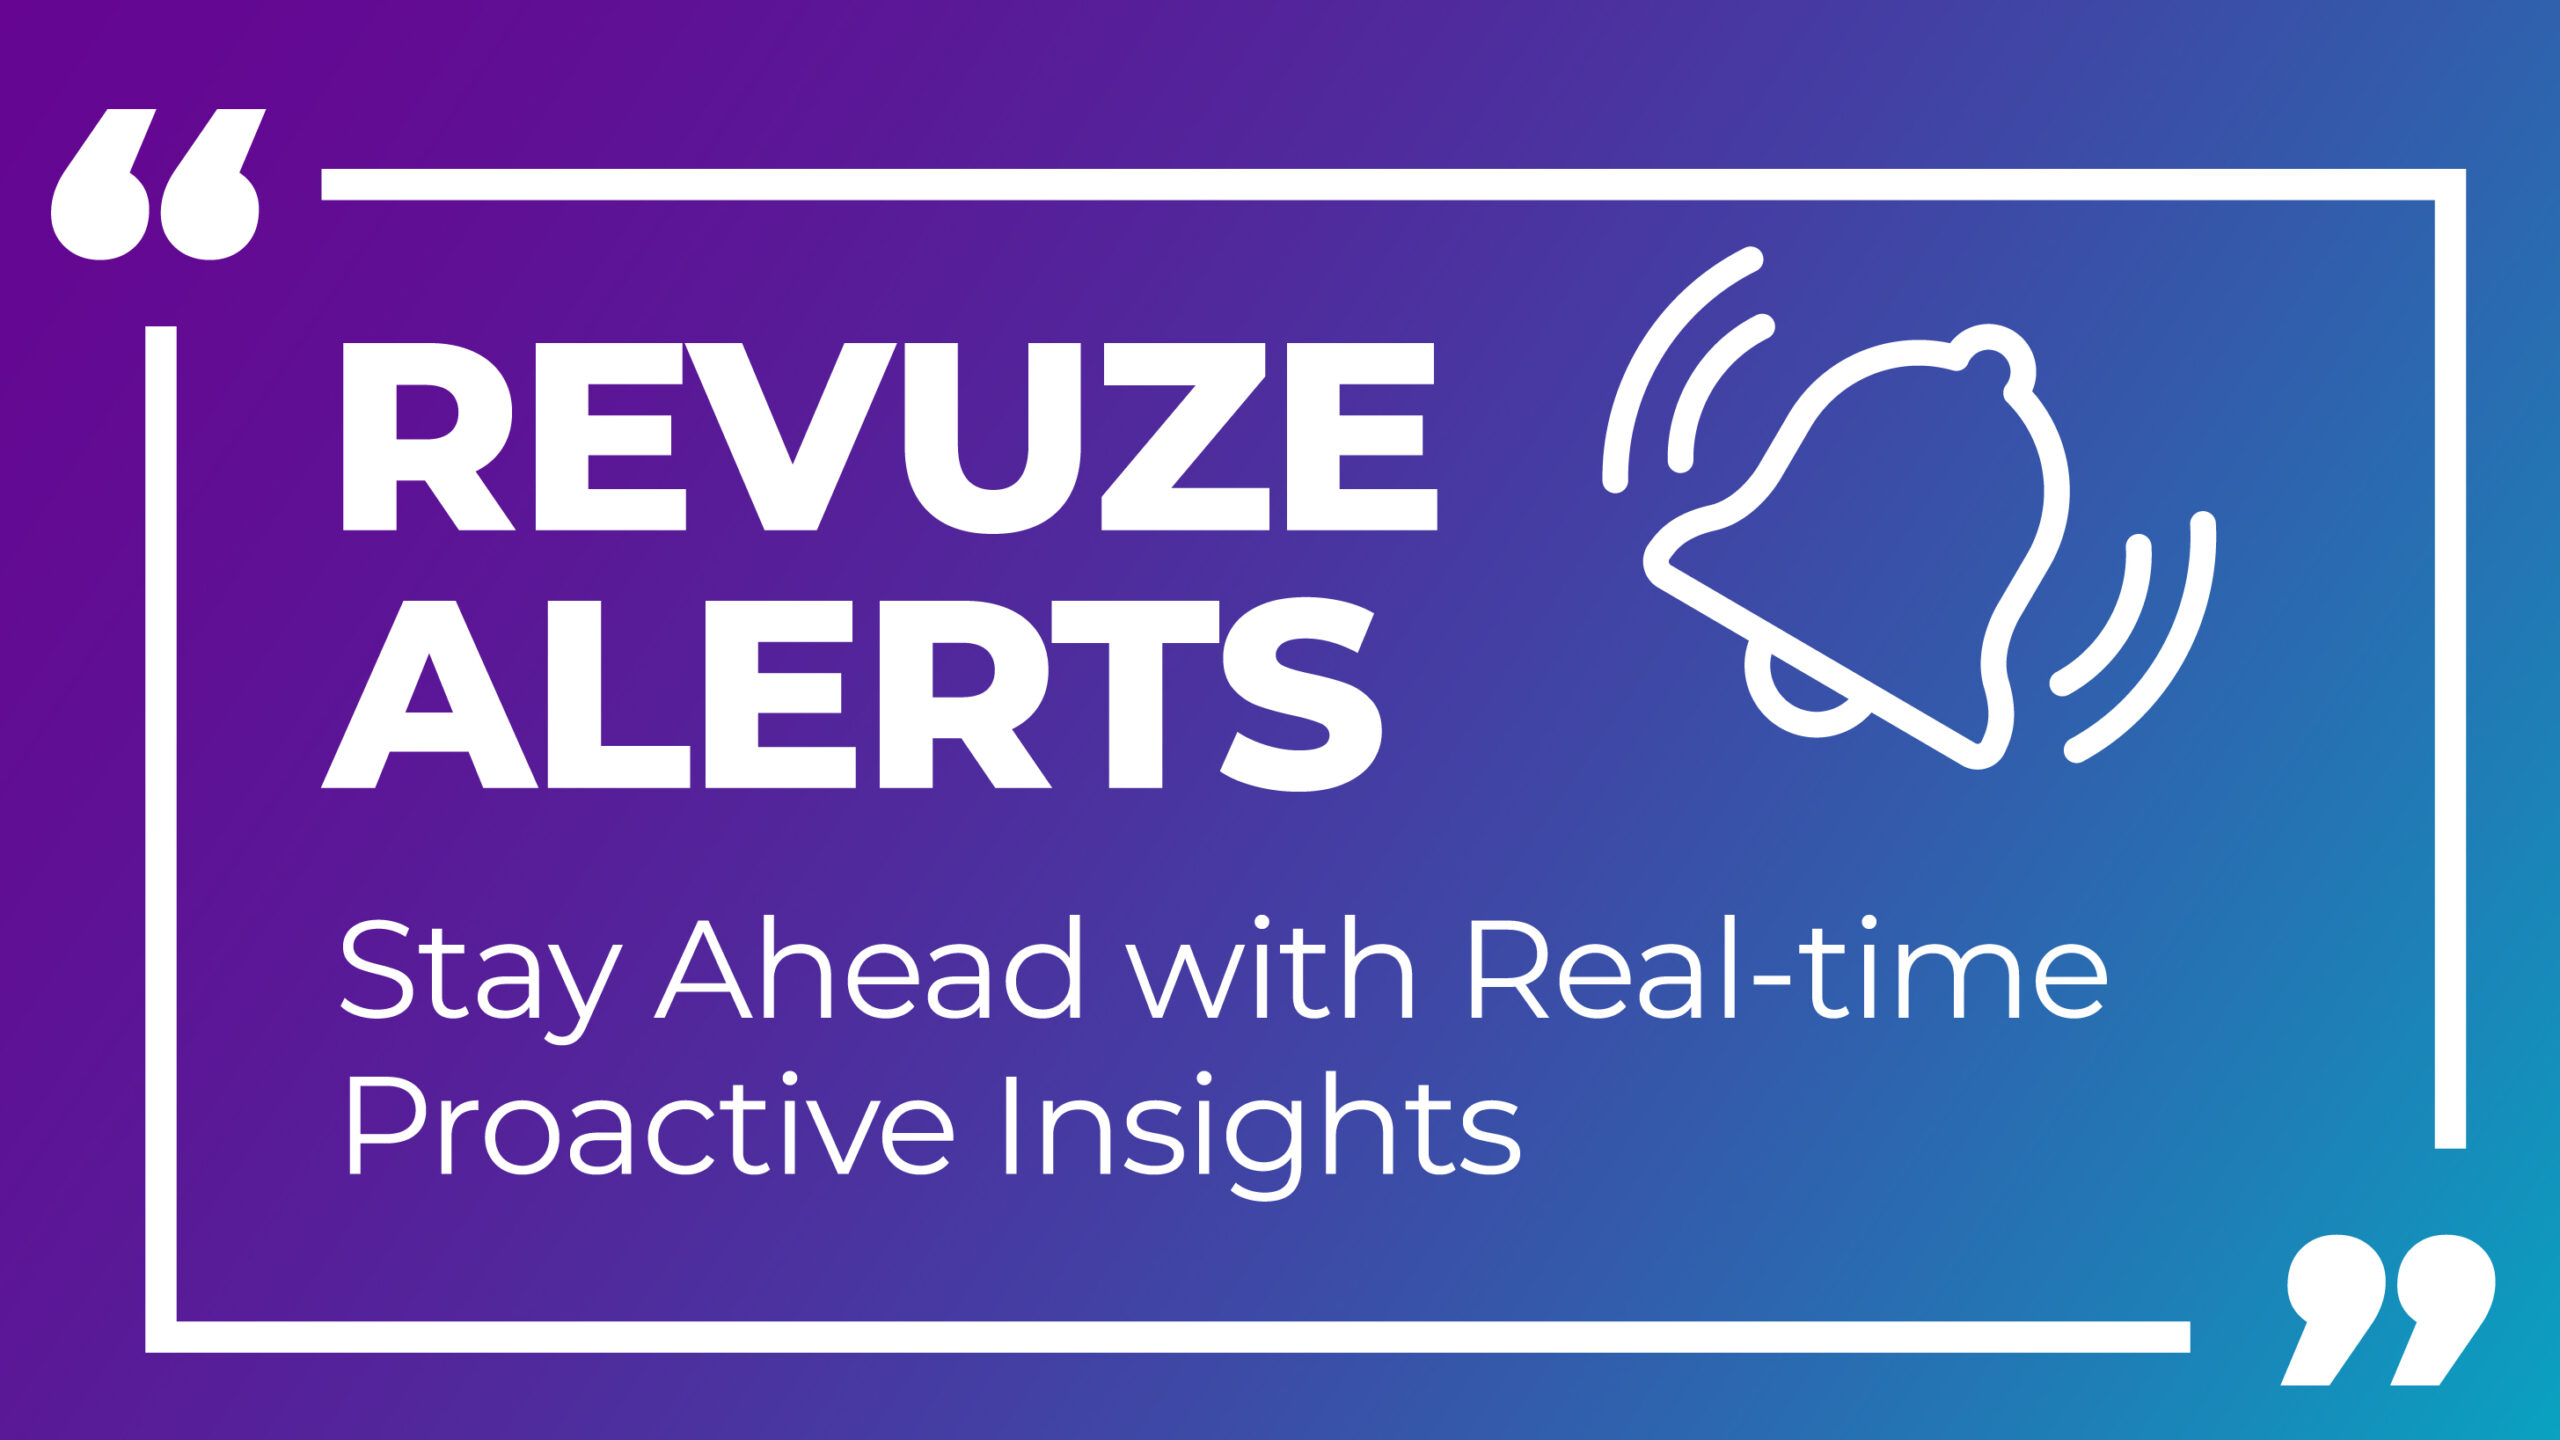 Stay Ahead of the Game with Revuze Alerts: AI-Powered Insights for Consumer Brands